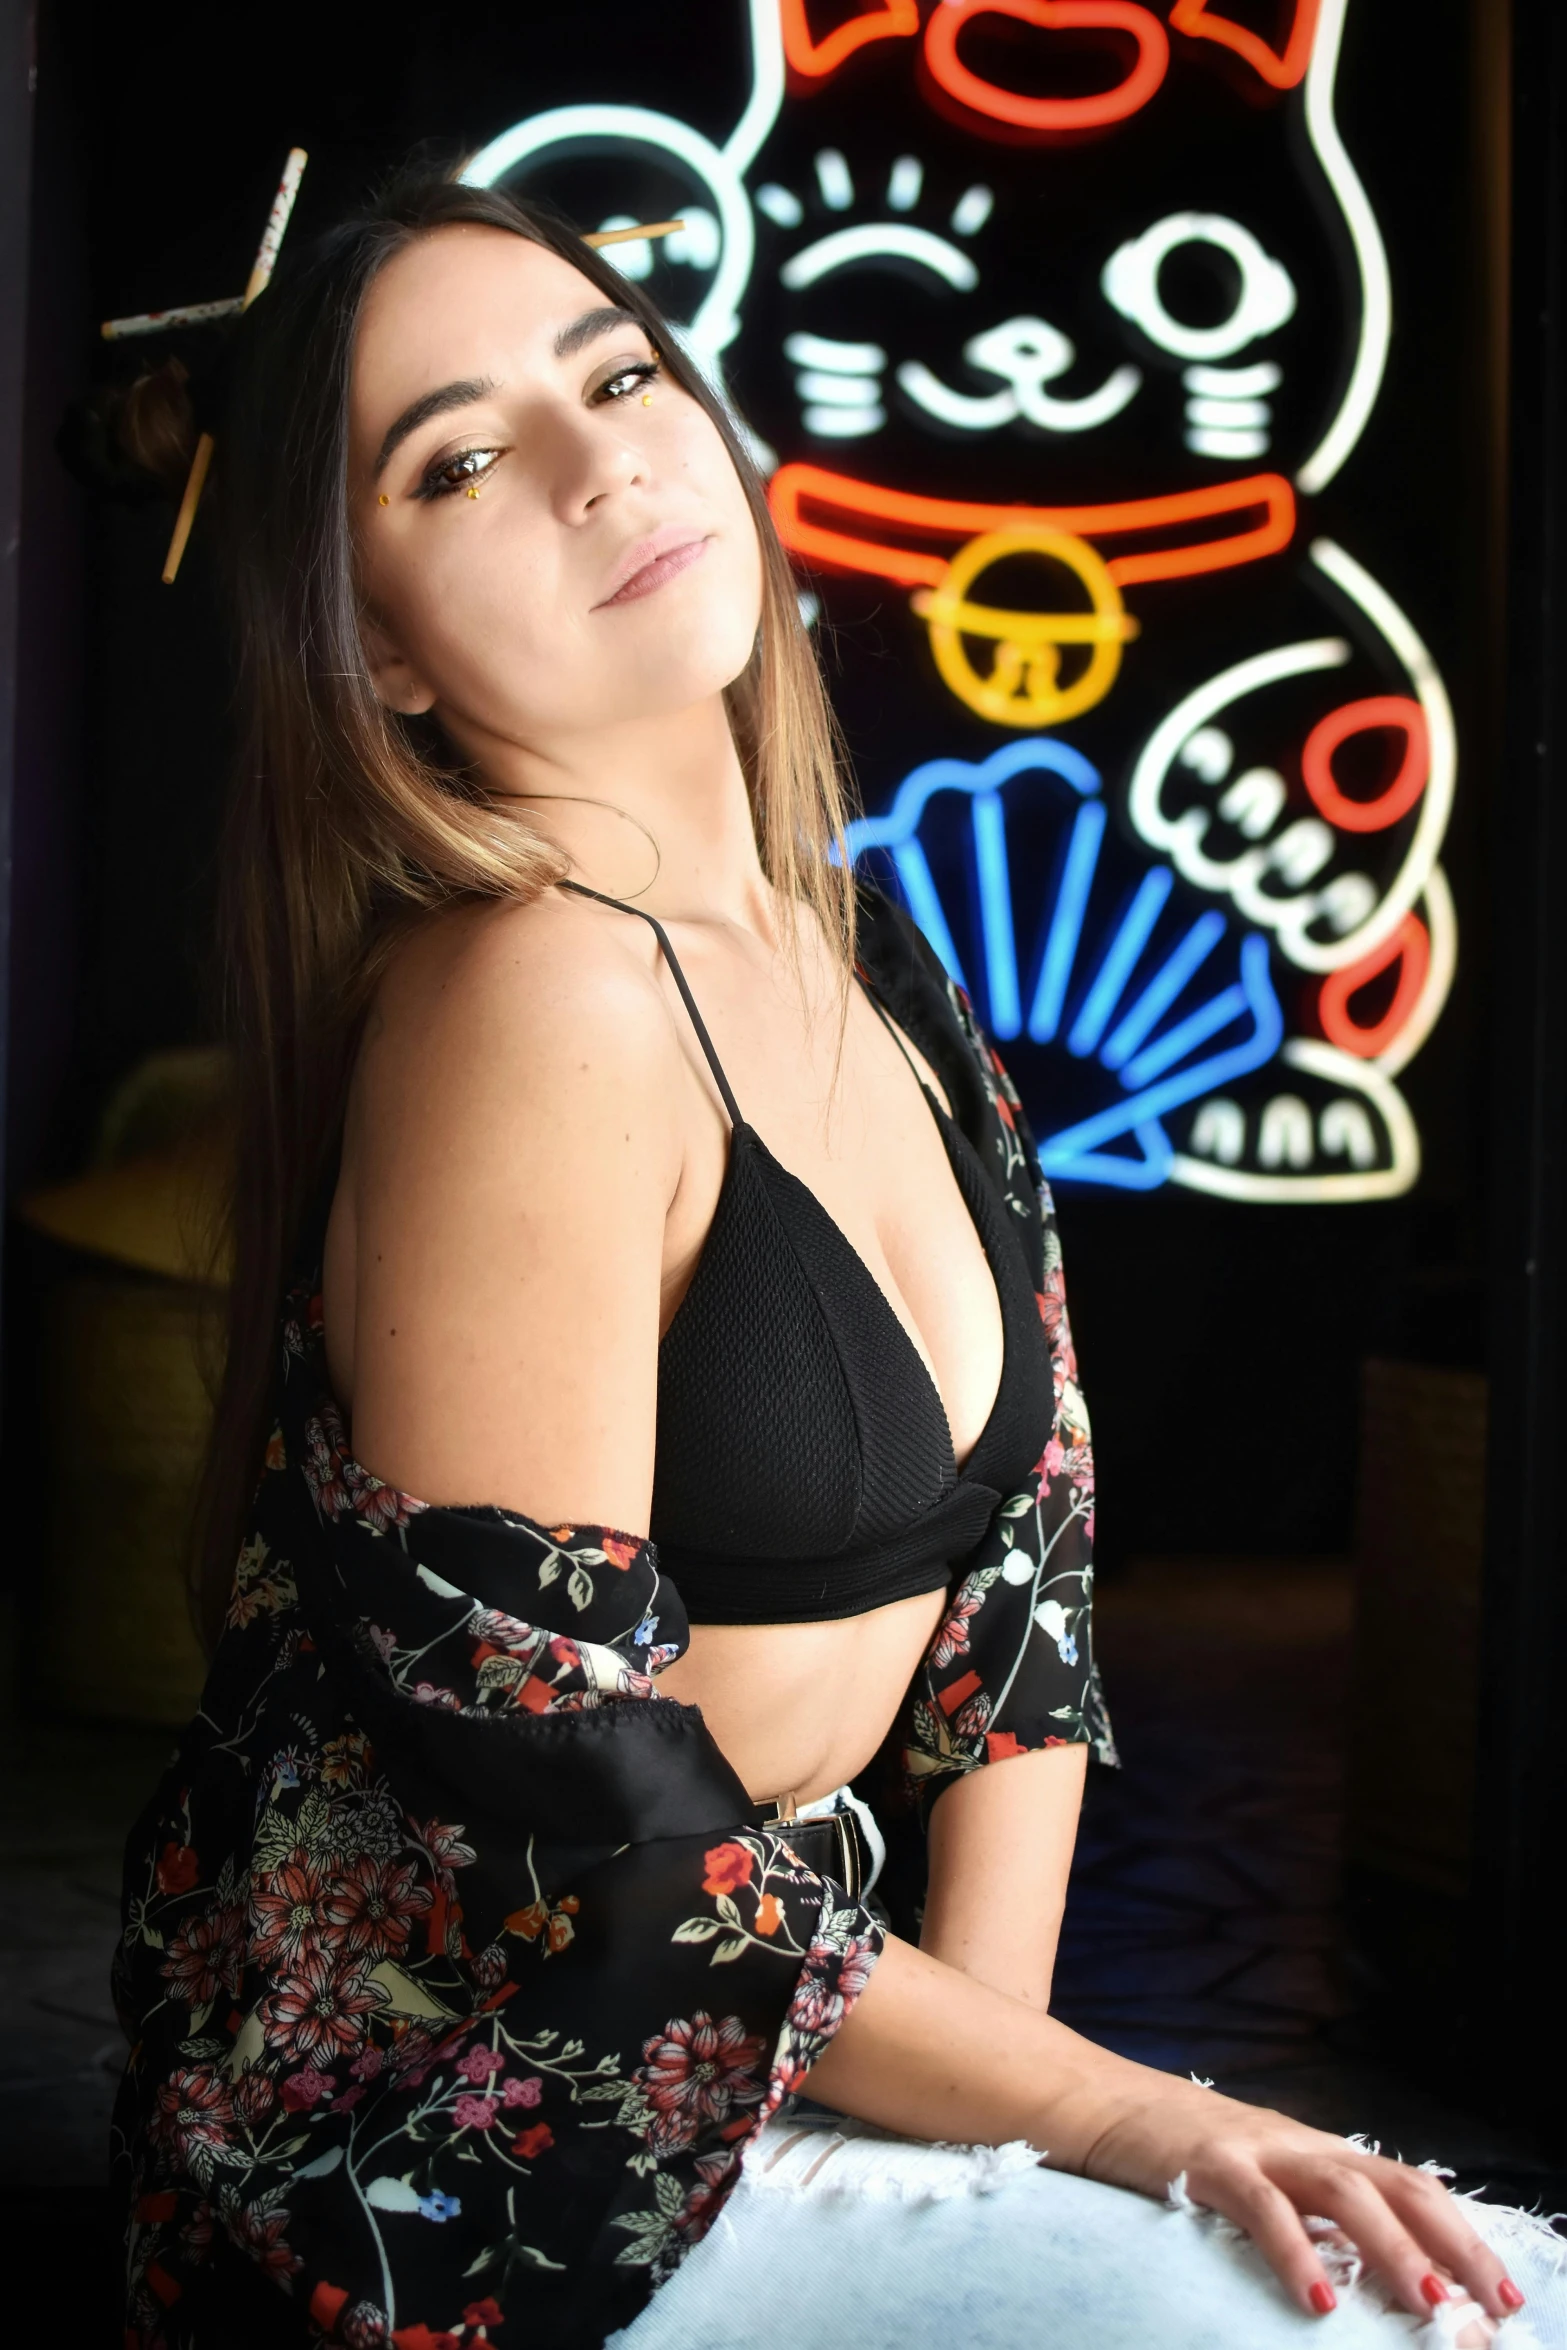 the young lady is posing in front of the neon sign